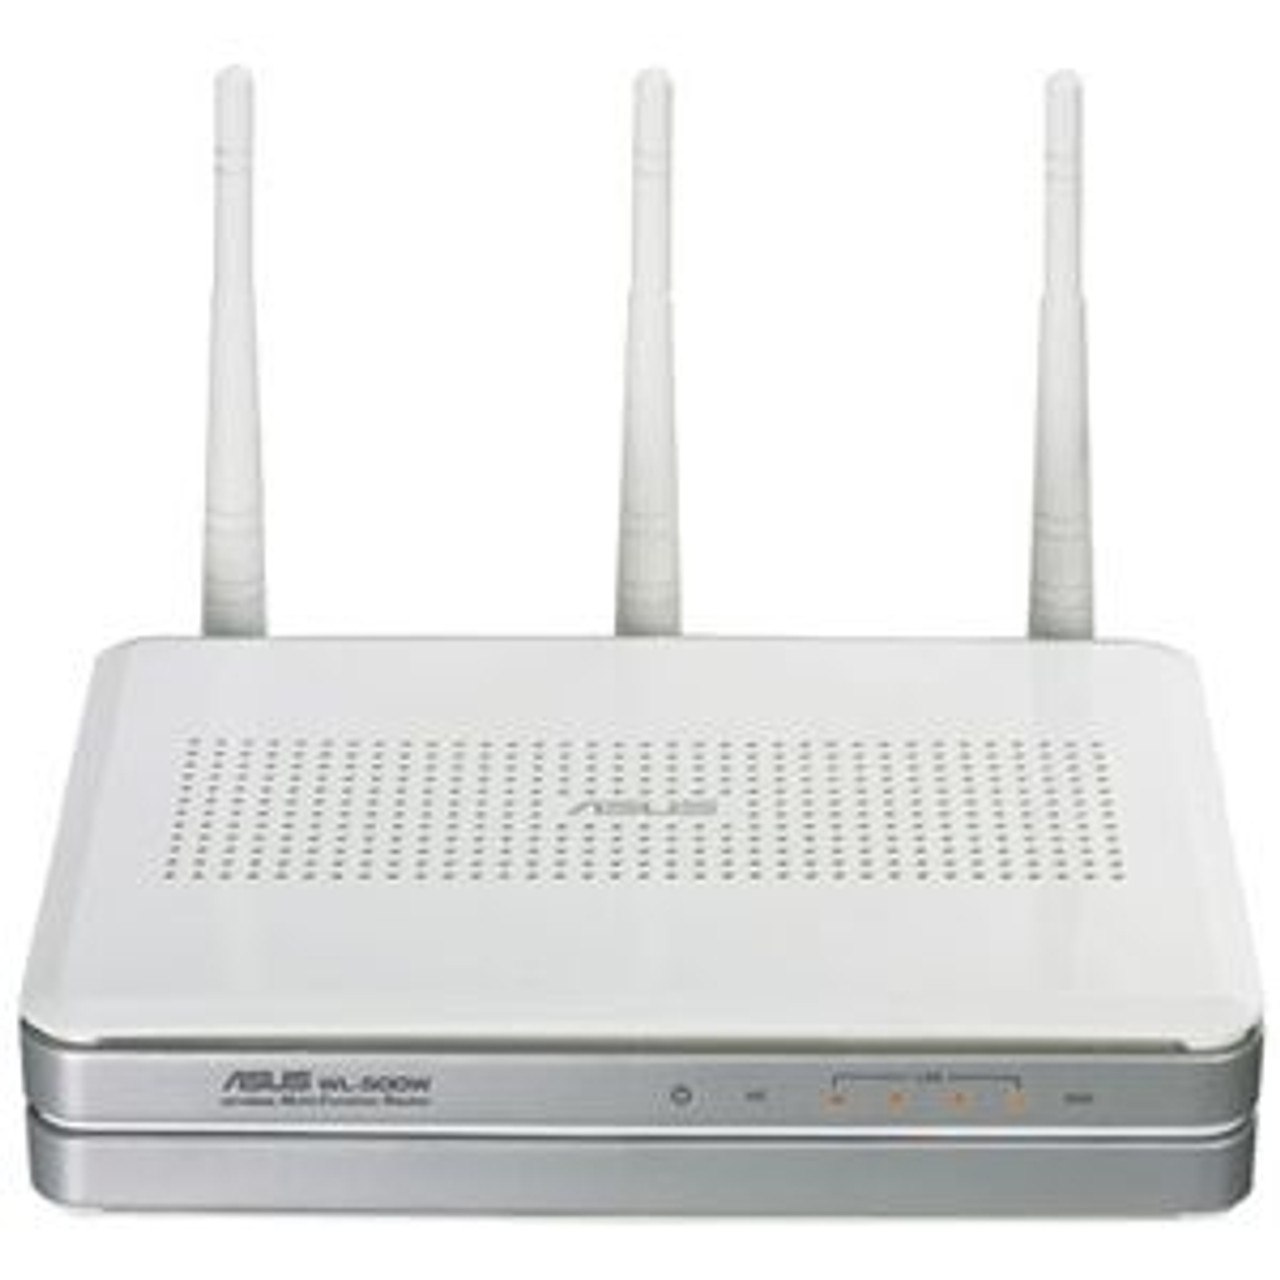 90-IAB002A00-03PZ ASUS WL-500W 802.11n Multi-Functional Wireless Router (Refurbished)